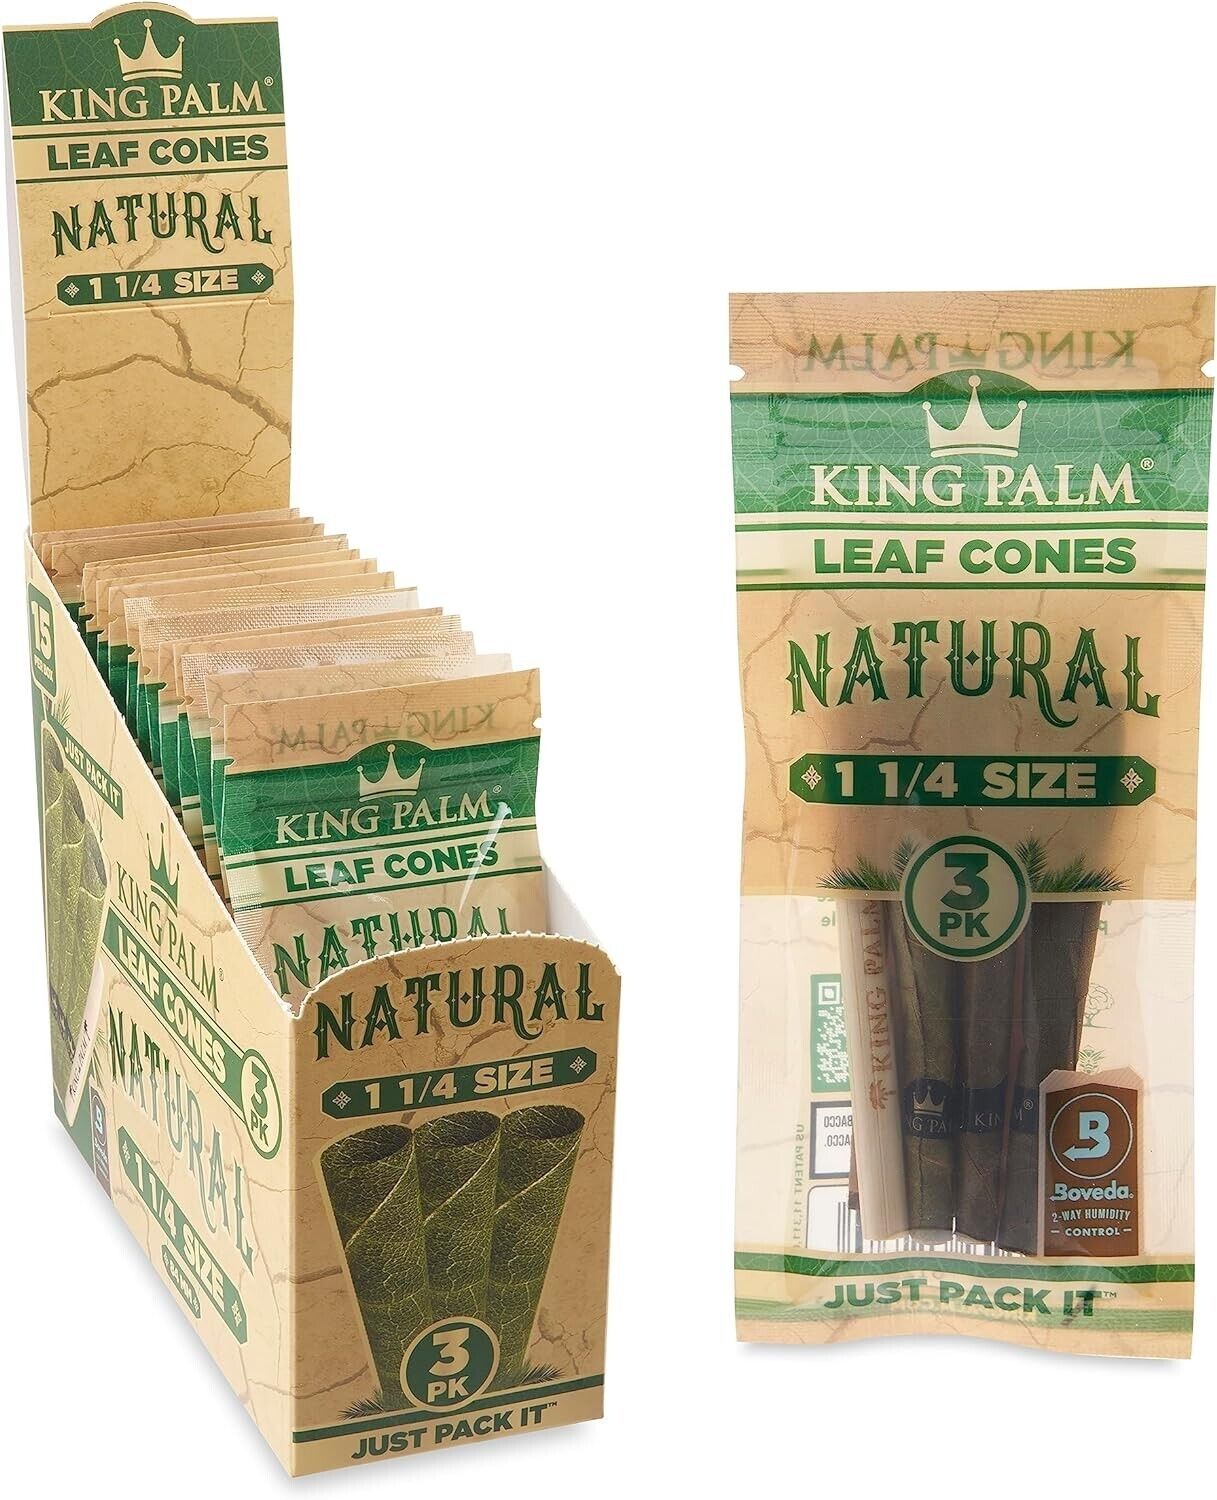 King Palm | 11/4 Size | Natural | Palm Leaf Rolls | 15 Packs of 3 Each =45 Rolls